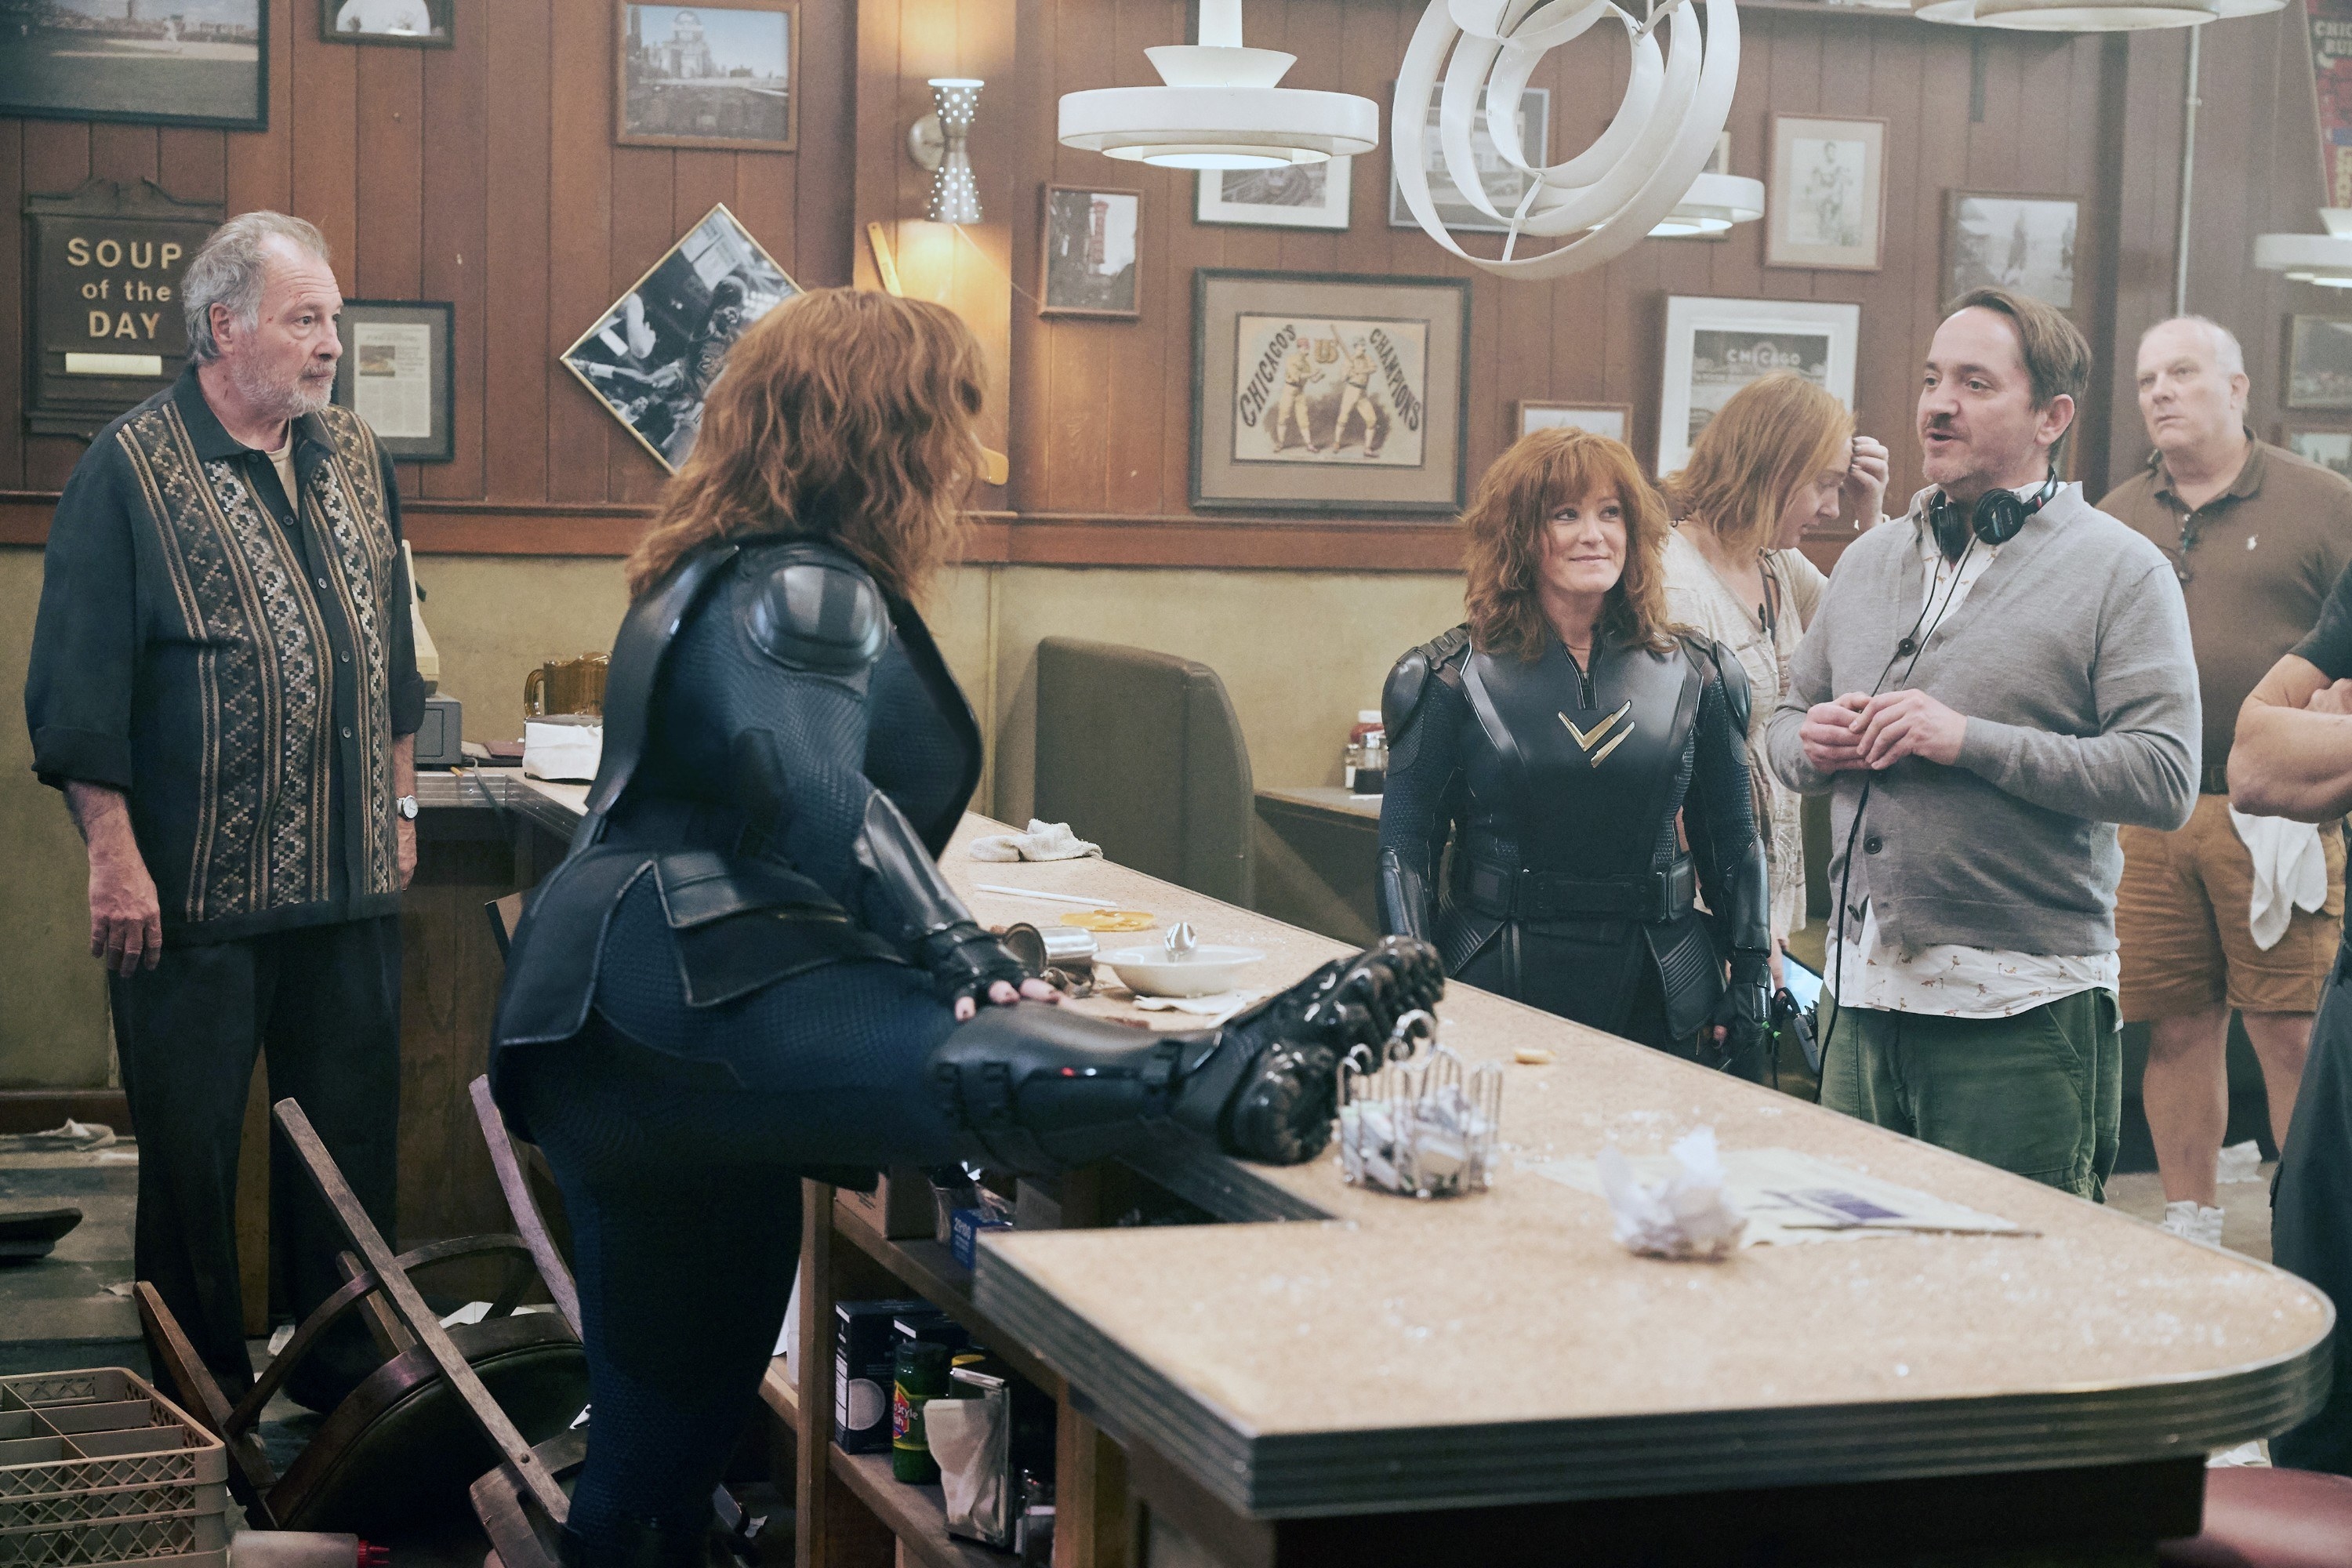 Melissa McCarthy and her stunt double receiving direction from the director of the film